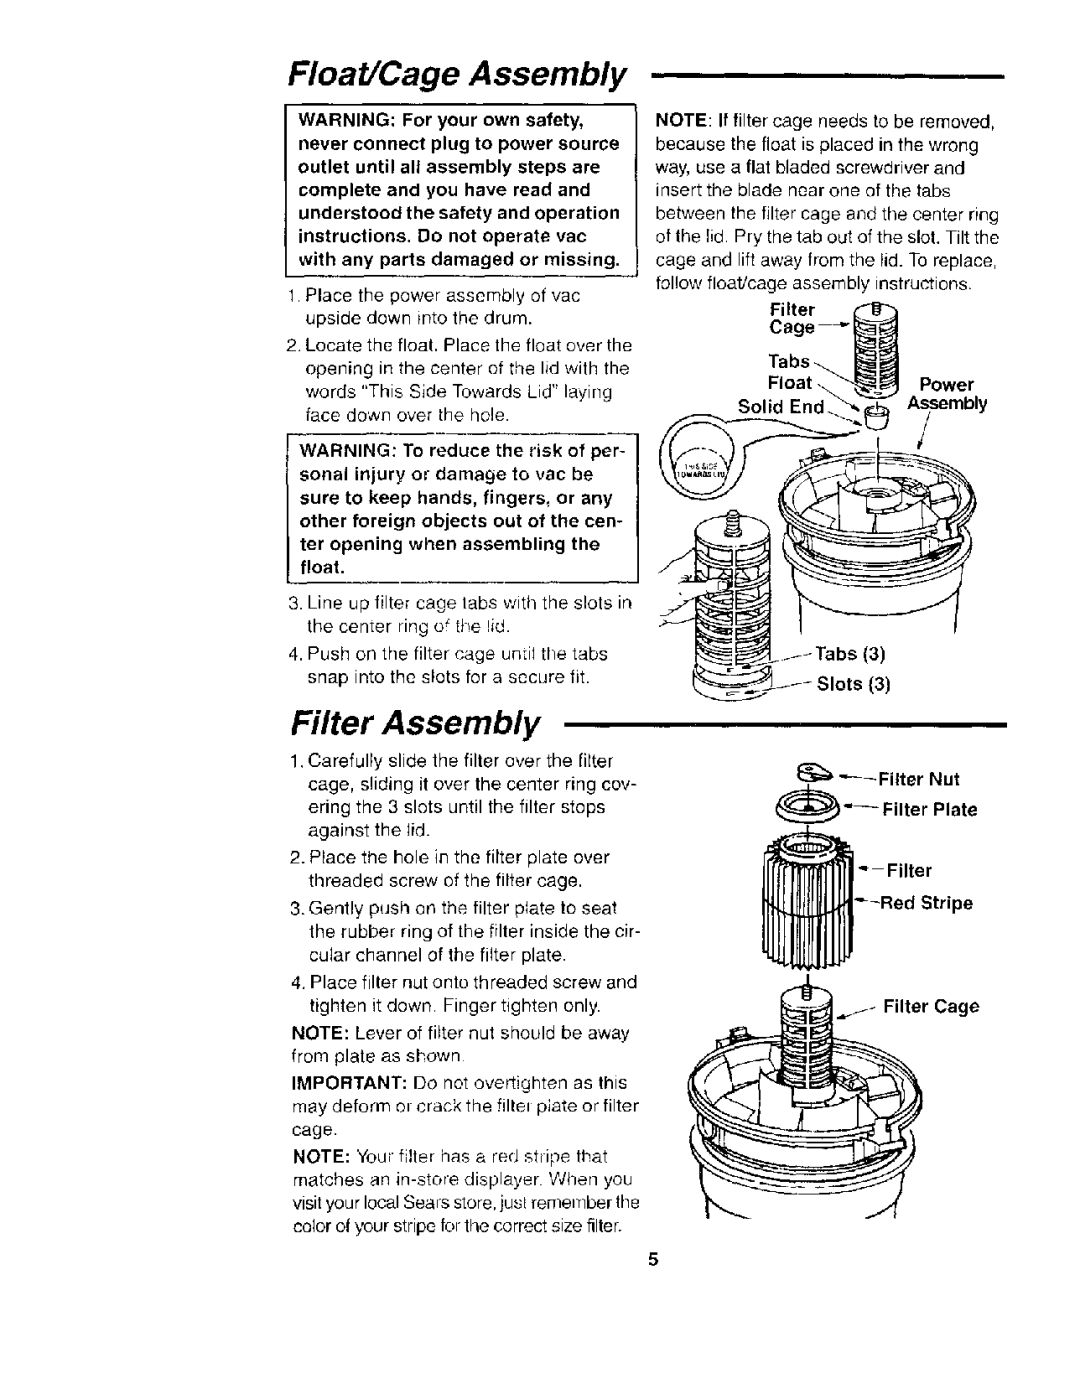 Sears 113.177035 owner manual Float/Cage Assembly, Filter Assembly 